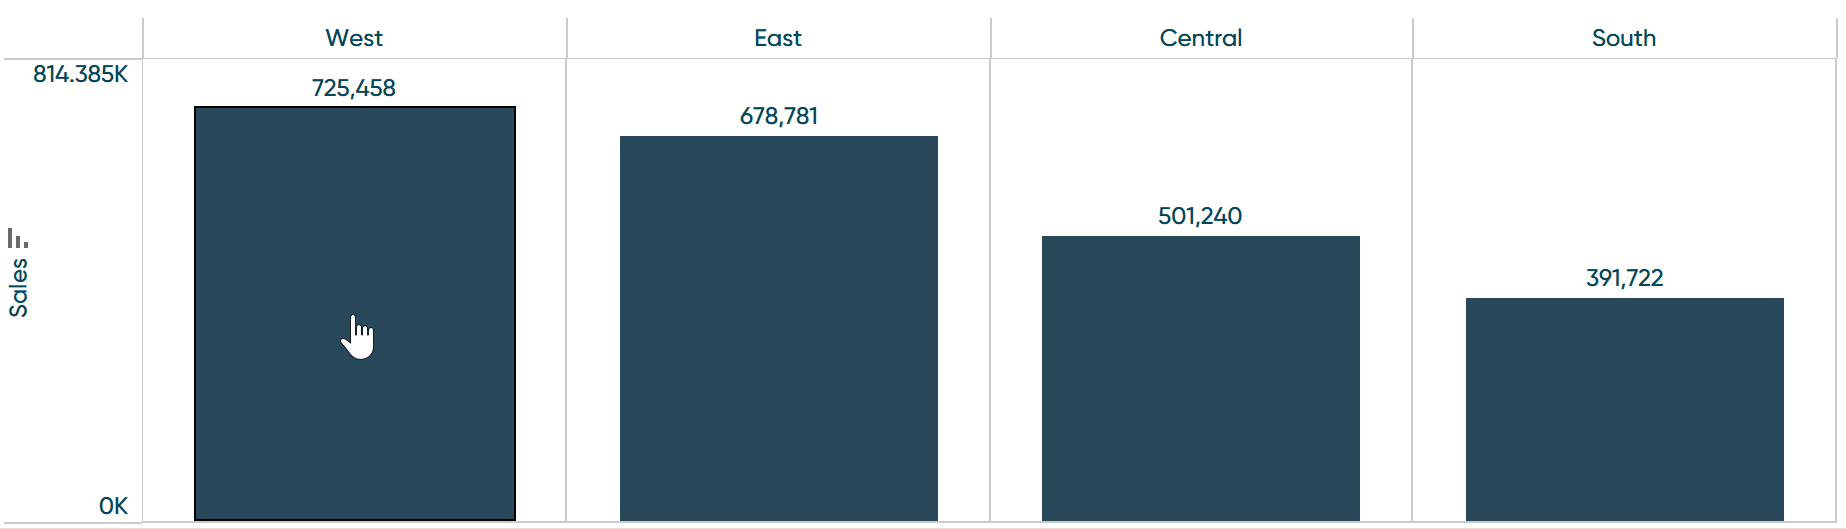 How to Drill into a Bar Chart Using Sets in Tableau | Playfair Data